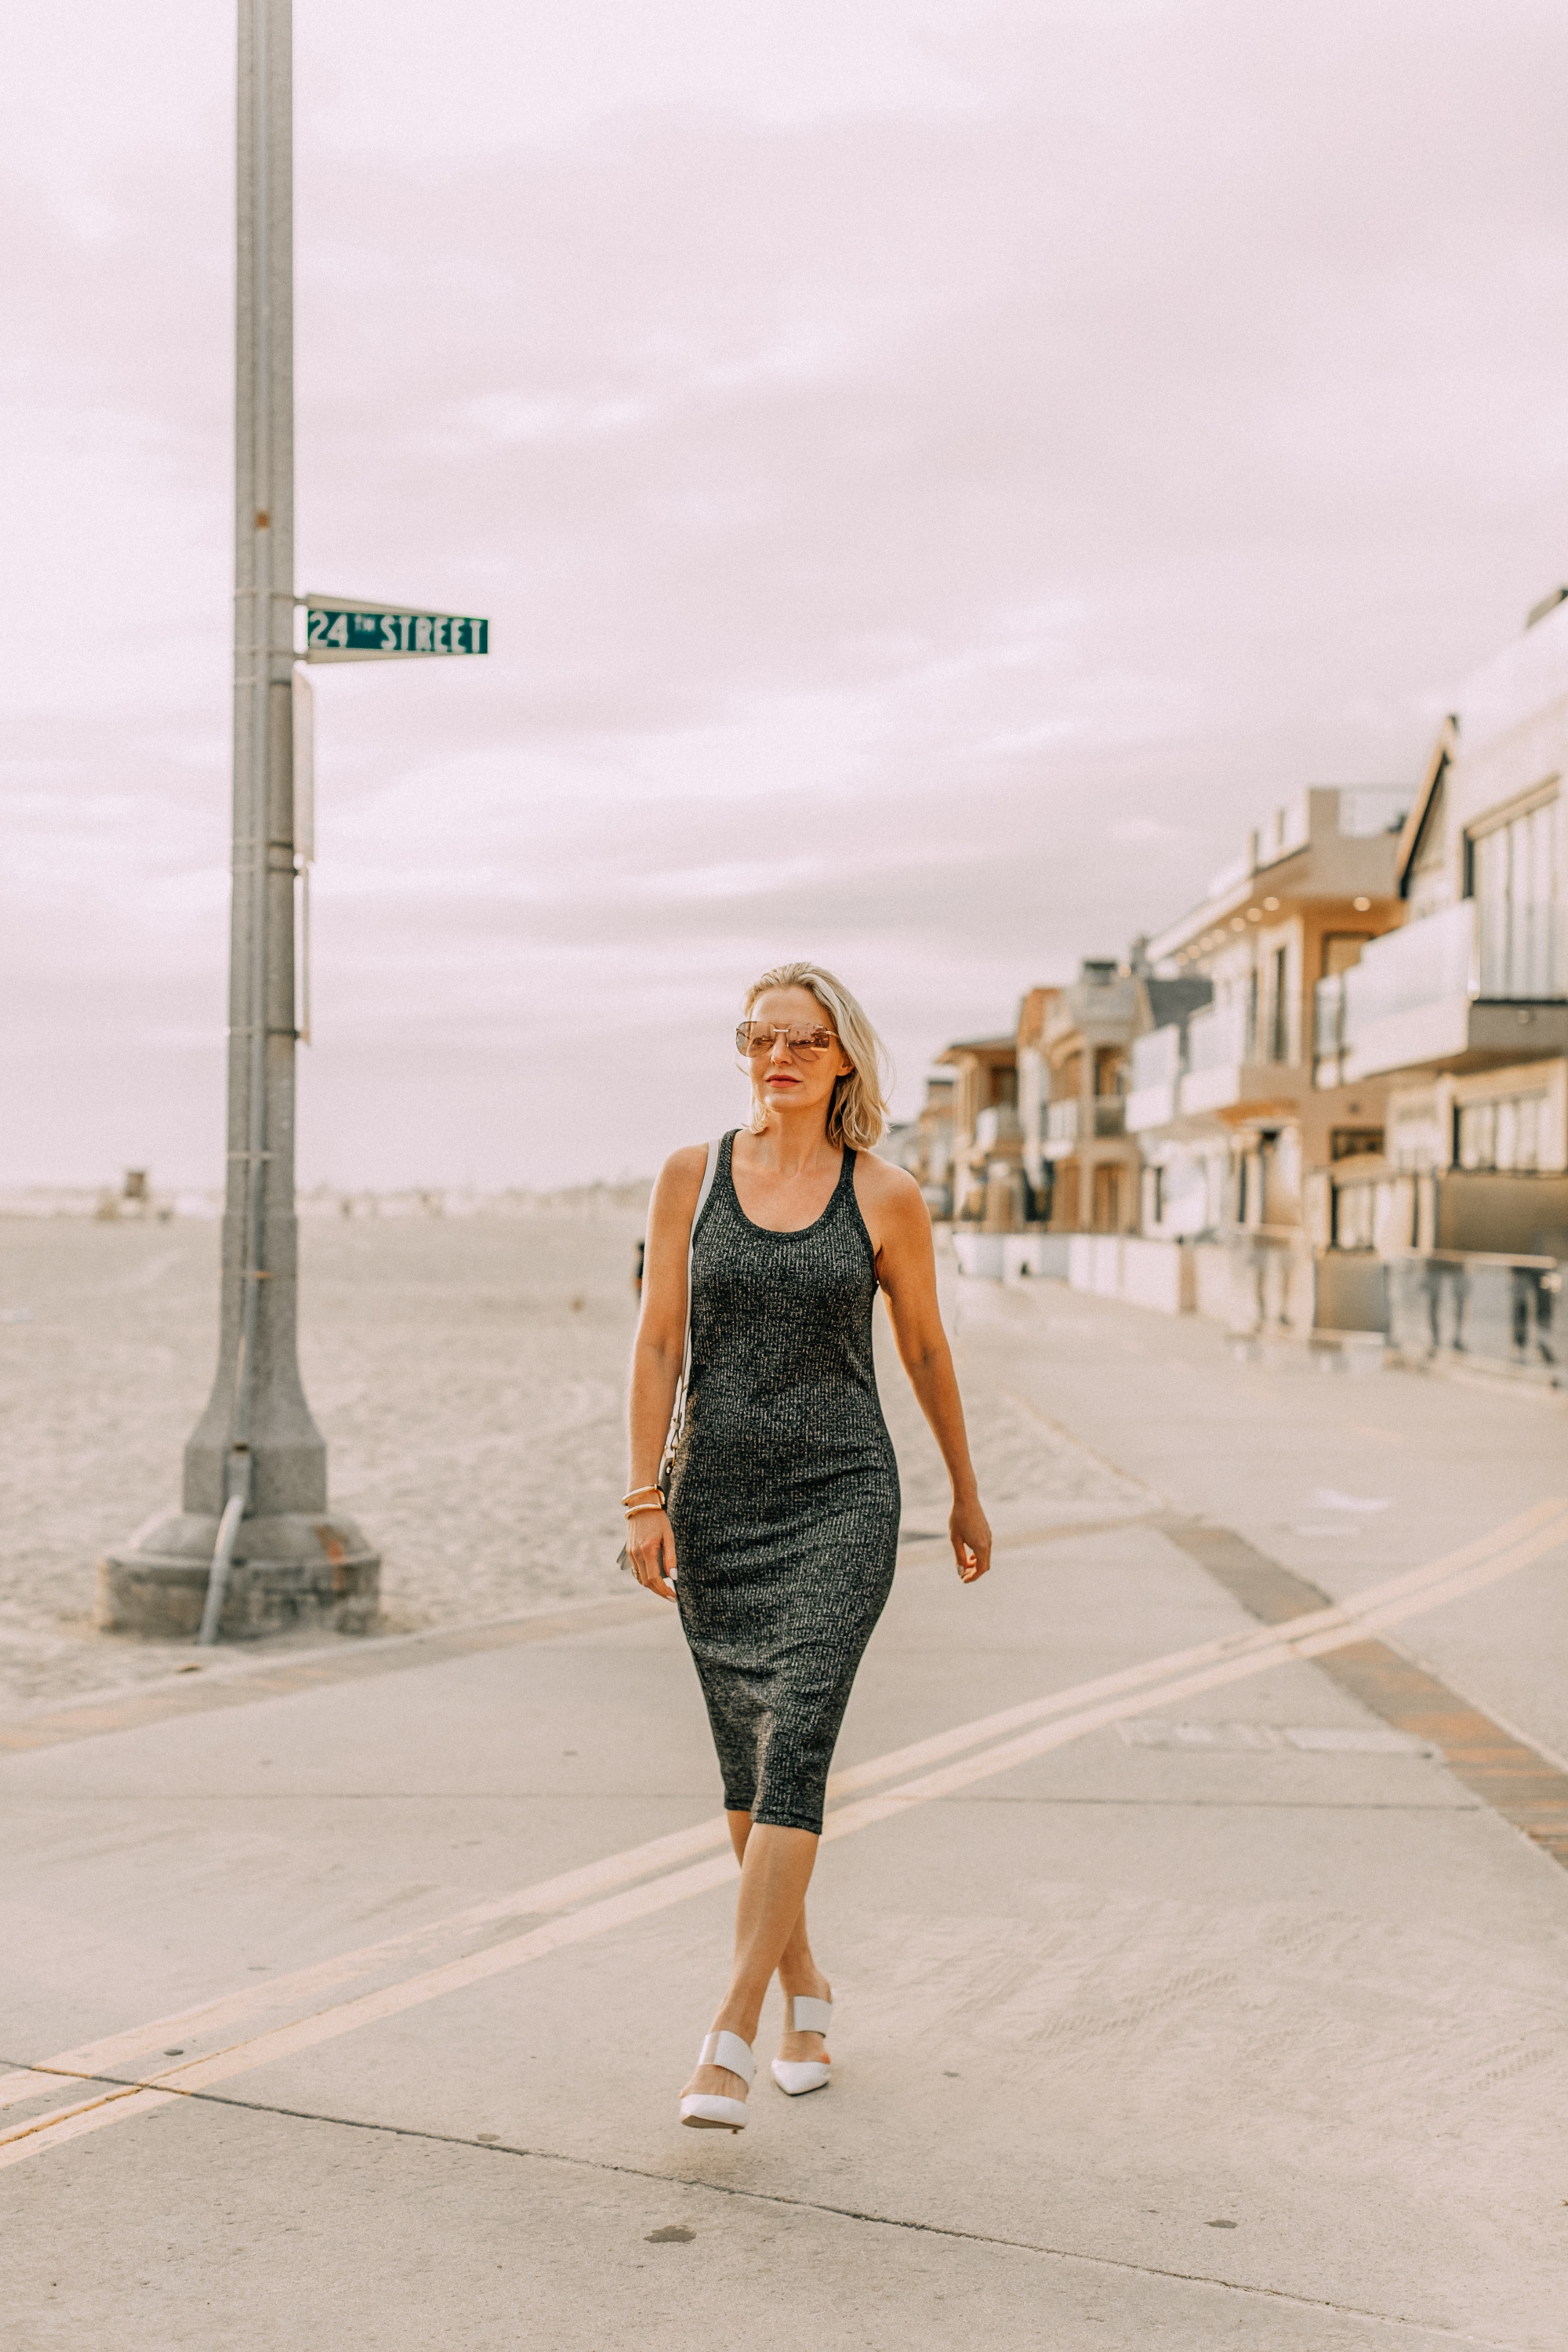 Tank Dresses for women over 40, Fashion blogger Busbee Style wearing gray rag & bone tank dress on the beach at Newport Beach, CA with white Sam Edelman pumps